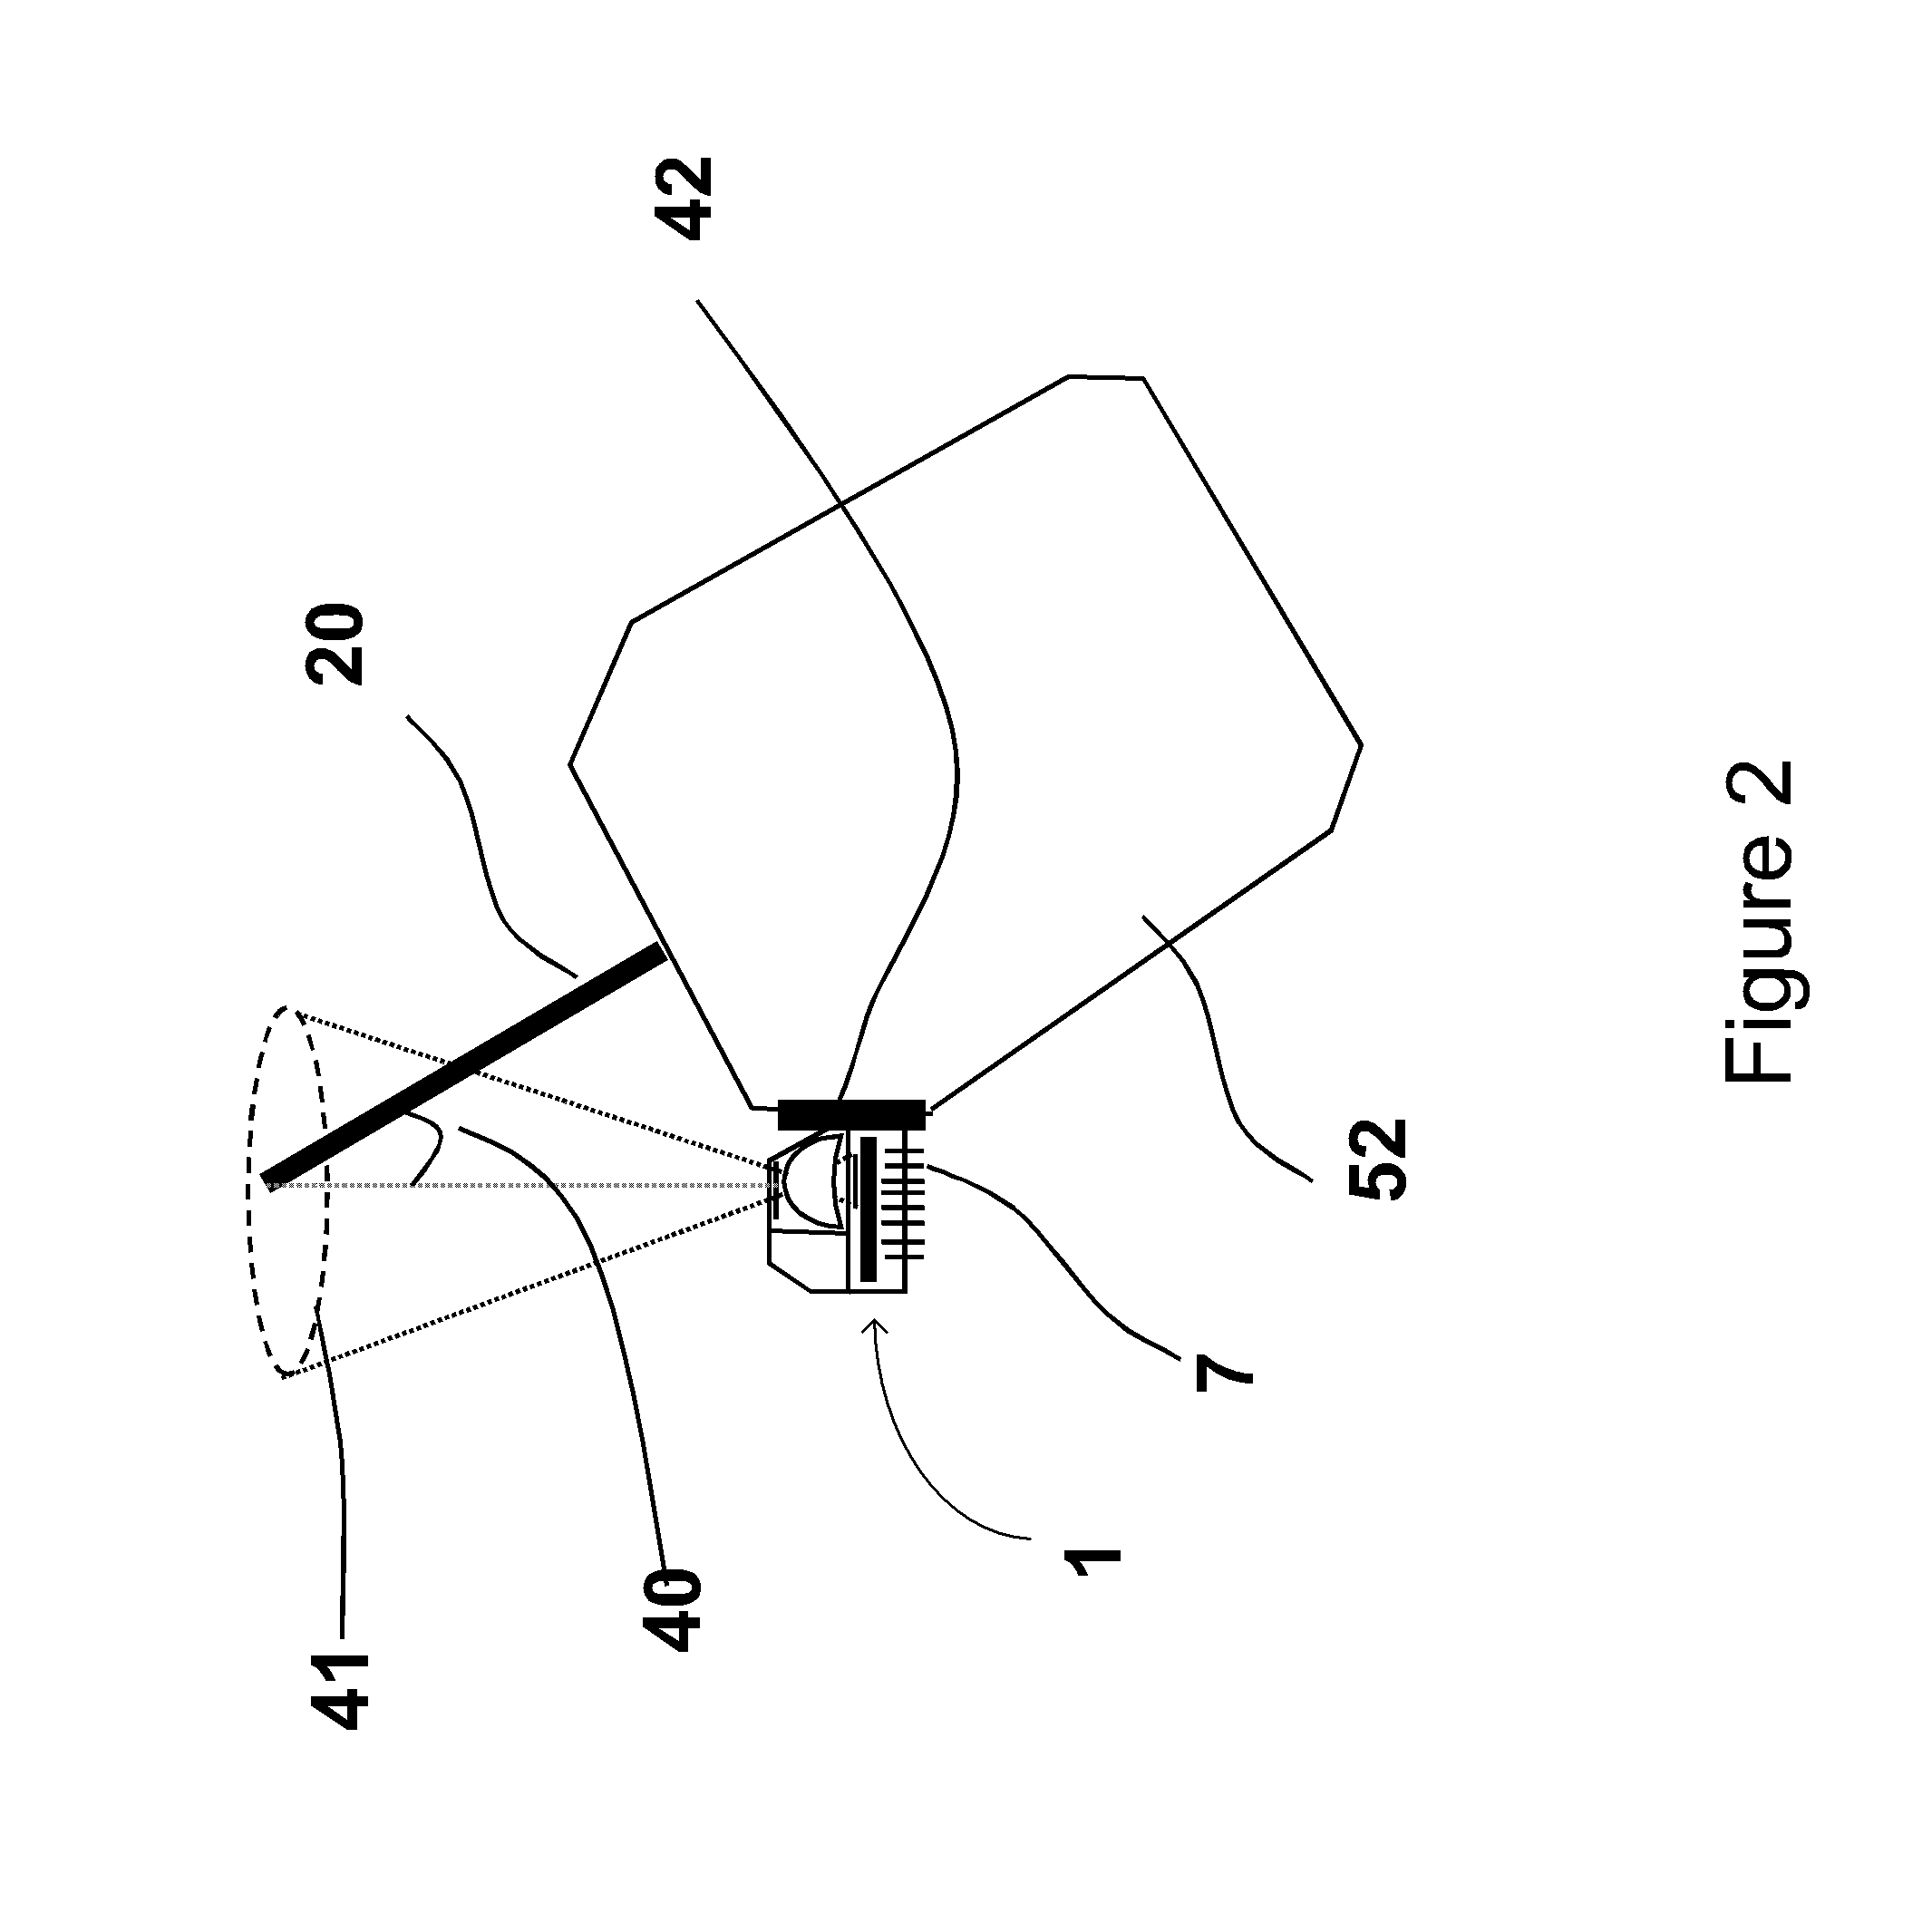 Imaging device for dental instruments and methods for intra-oral viewing